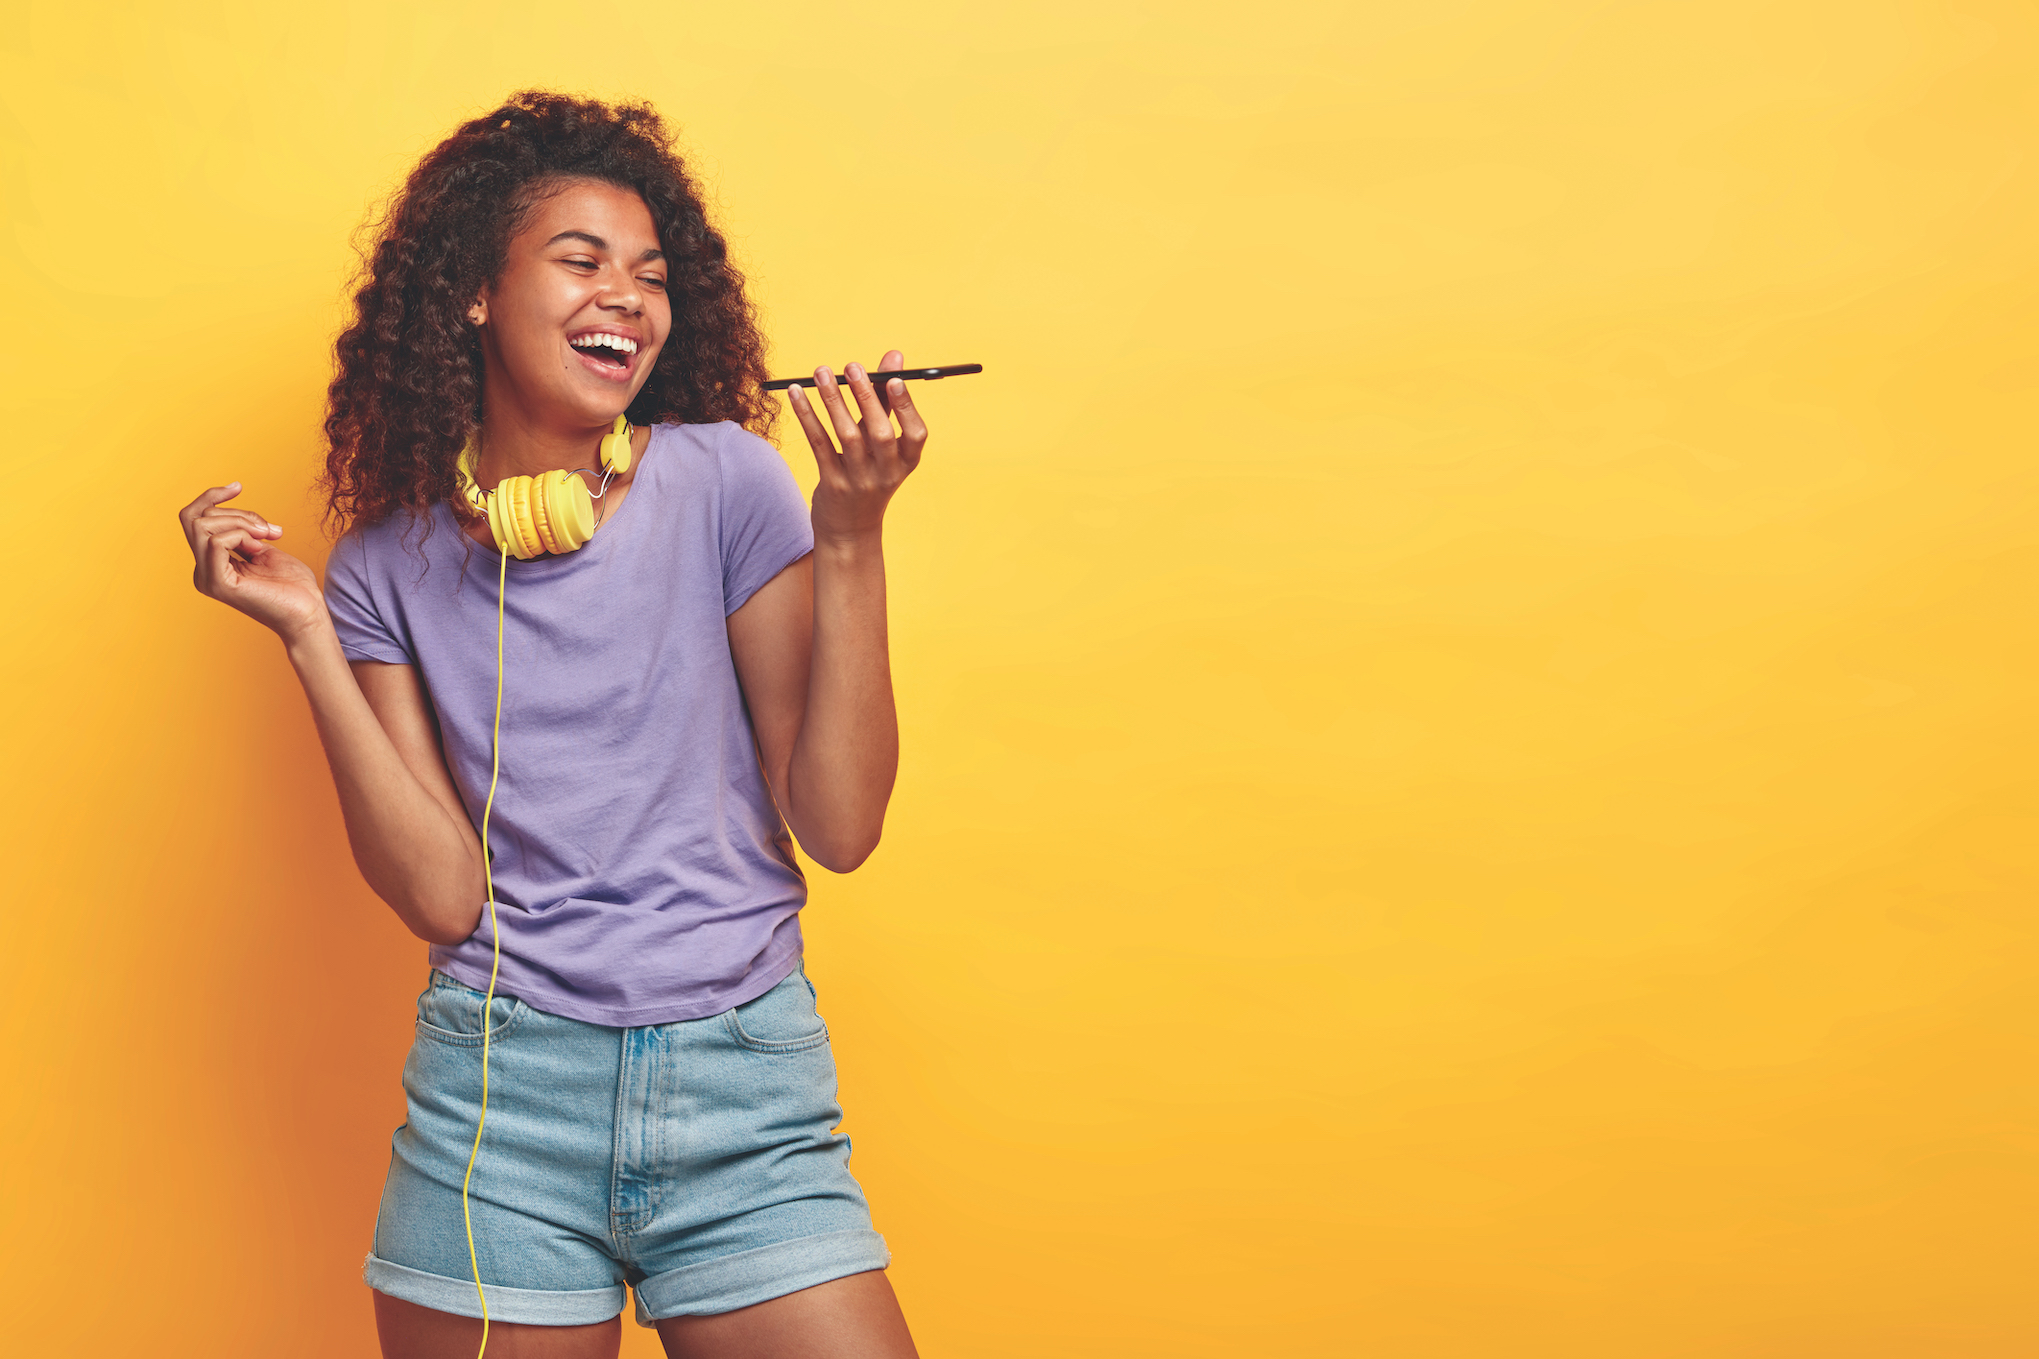 Smiling, Black teenage girl in a light purple t-shirt and jean shorts stands in front of a yellow background with headphones around her neck and holds a cell phone